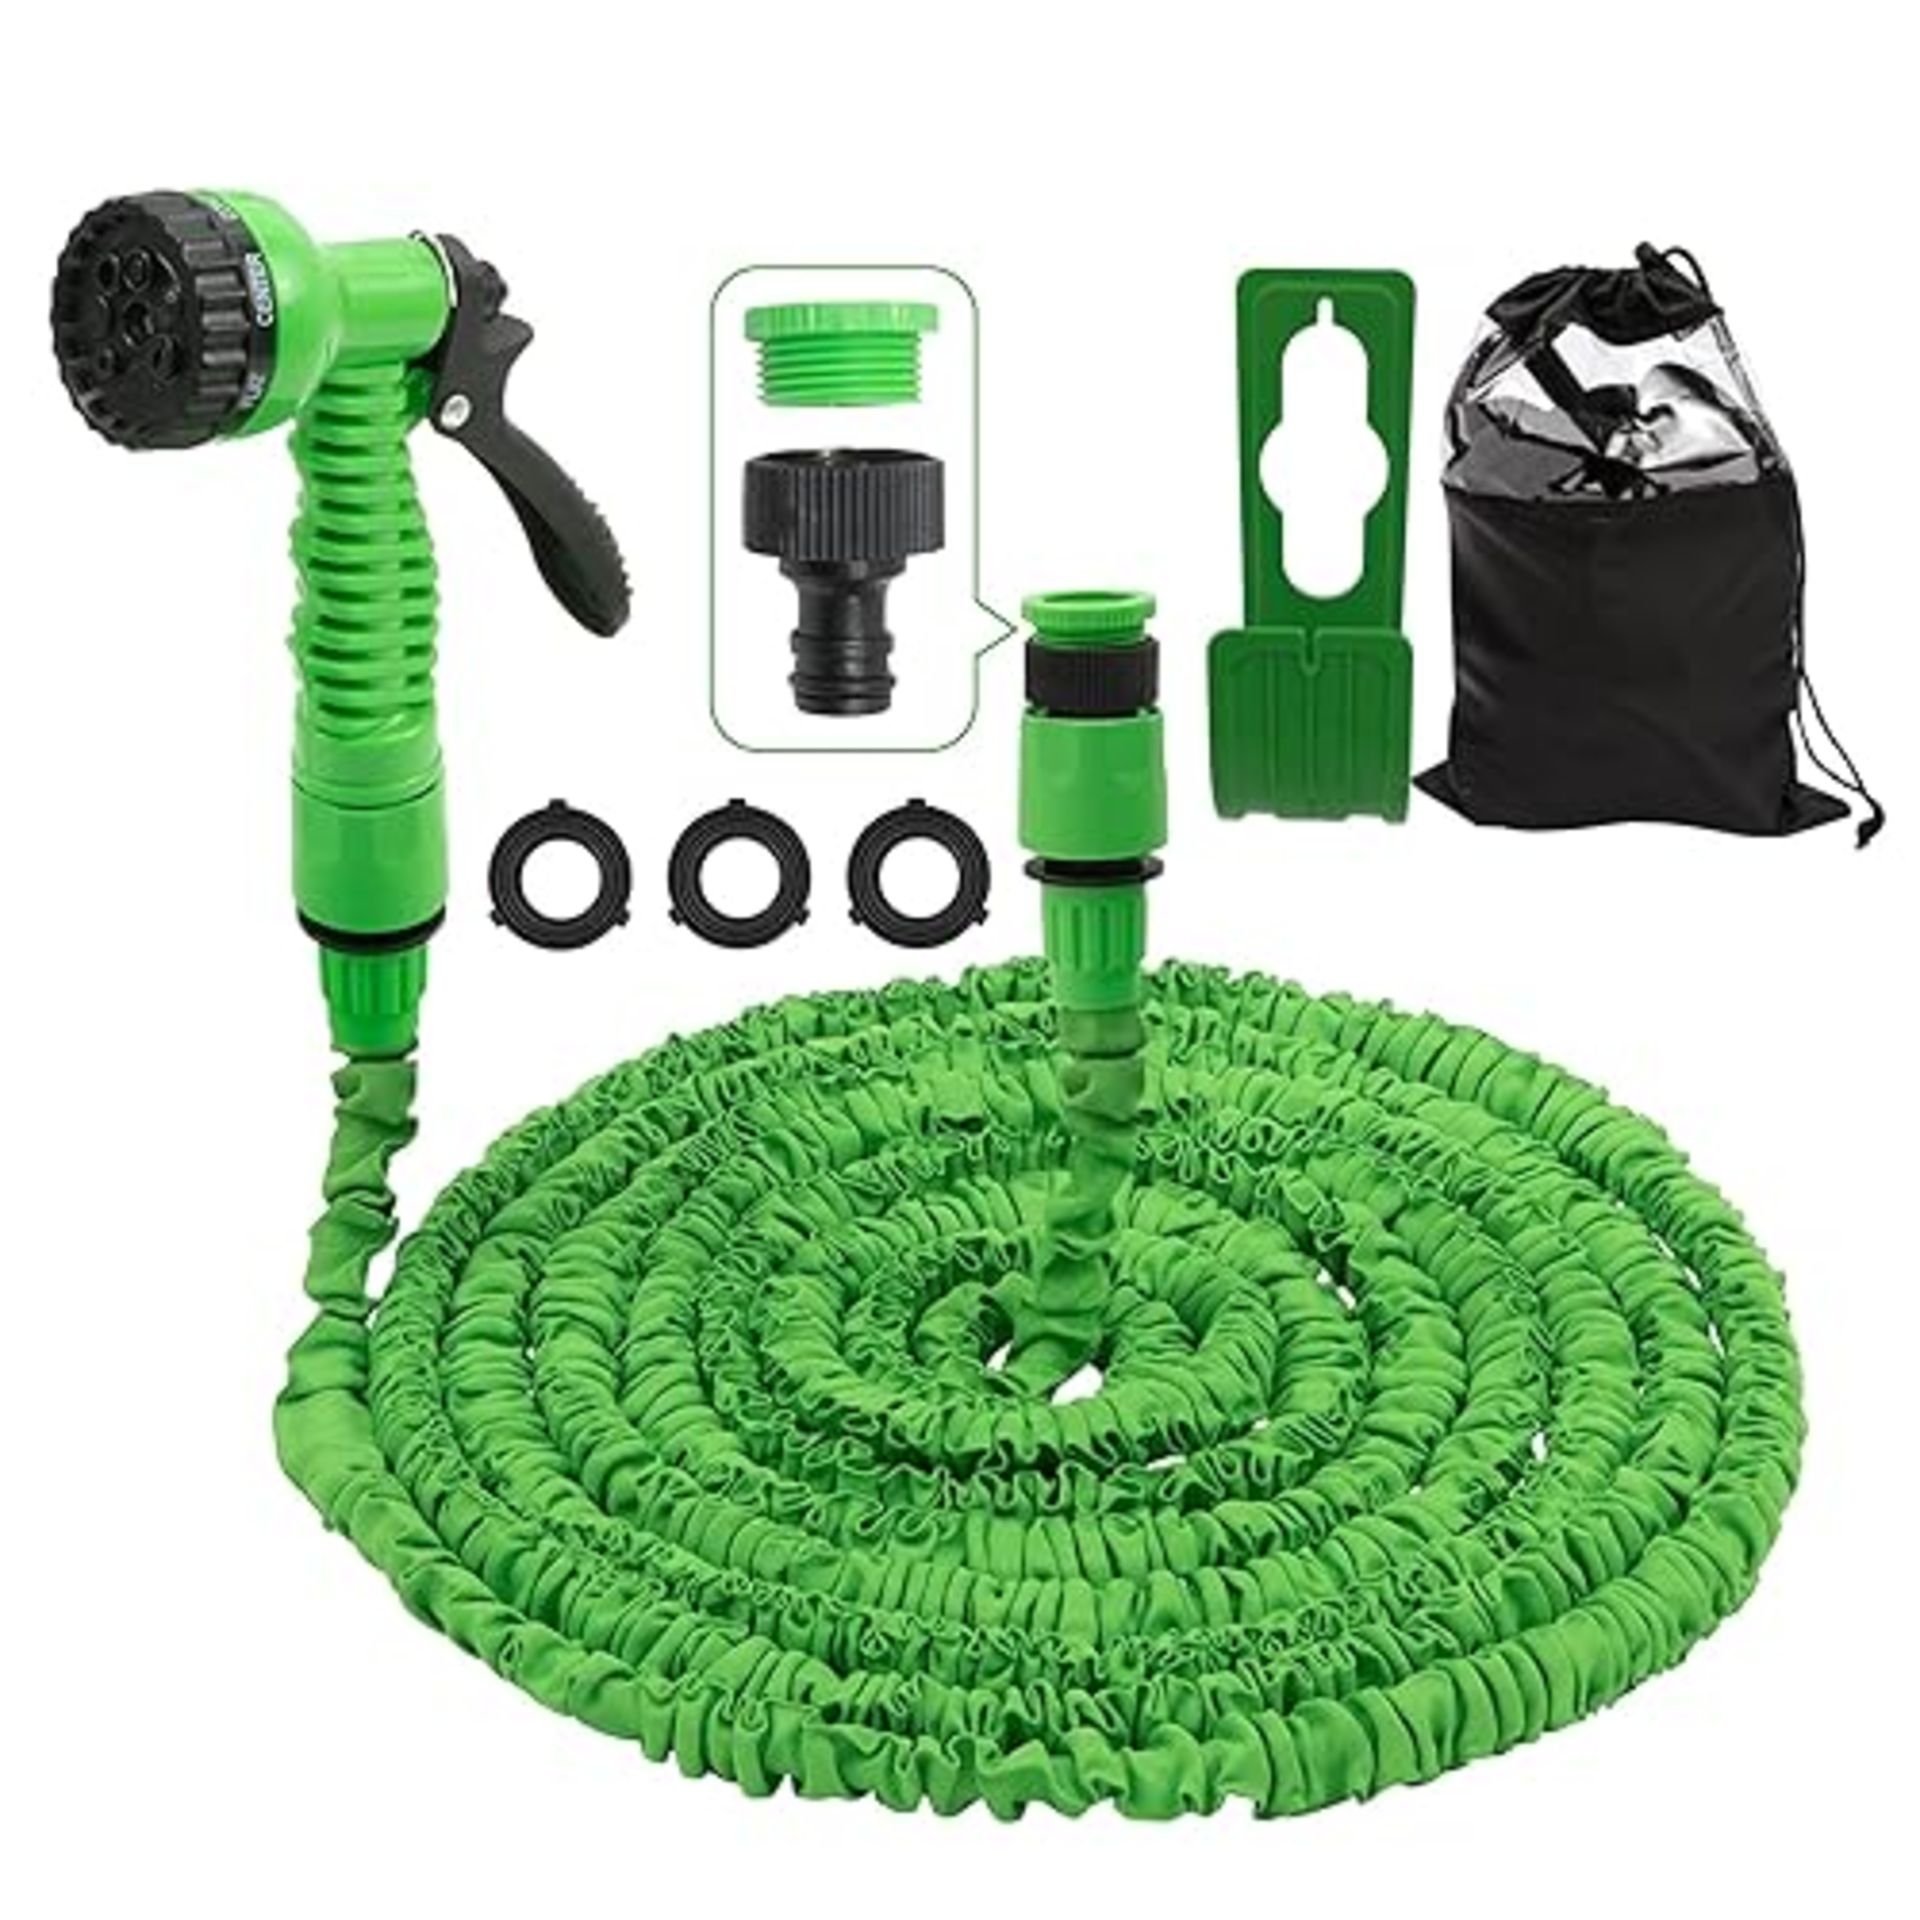 kitnice Expandable Garden Hose 100FT - Flexible Hose Pipe with Spray Gun. Ideal for Gardening, Wate